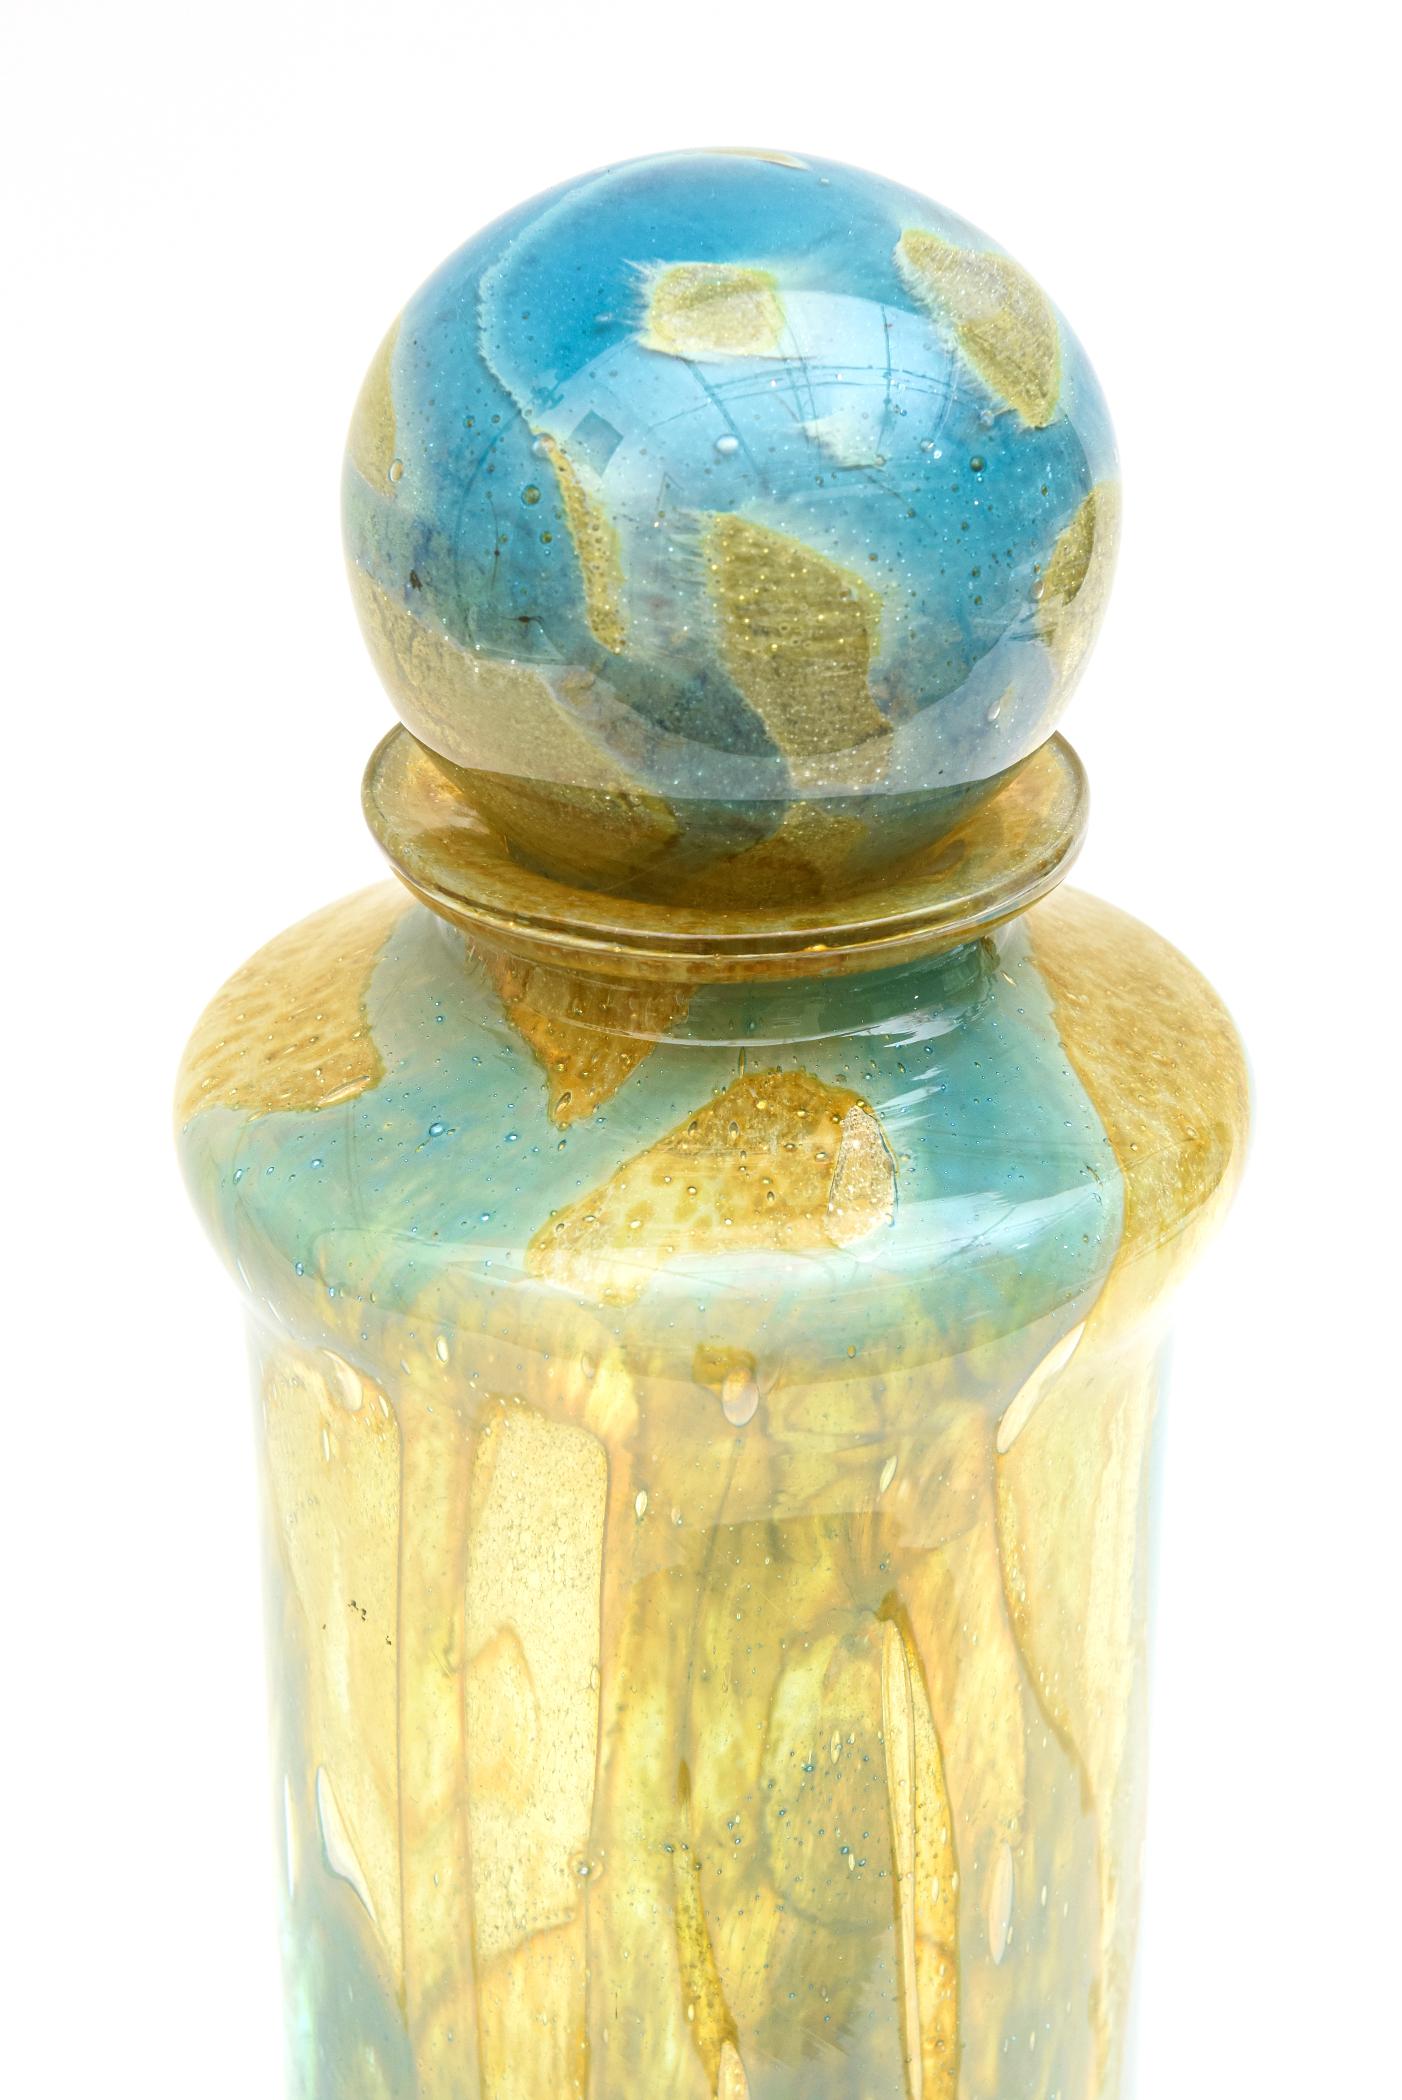 This tall commanding stellar signed vintage Mdina hand blown glass bottle/ decanter bottle / vessel / glass object is vintage from the 1970s. It has a large ball stopper and the beautiful colors range from turquoise to tiffany blue to yellows to